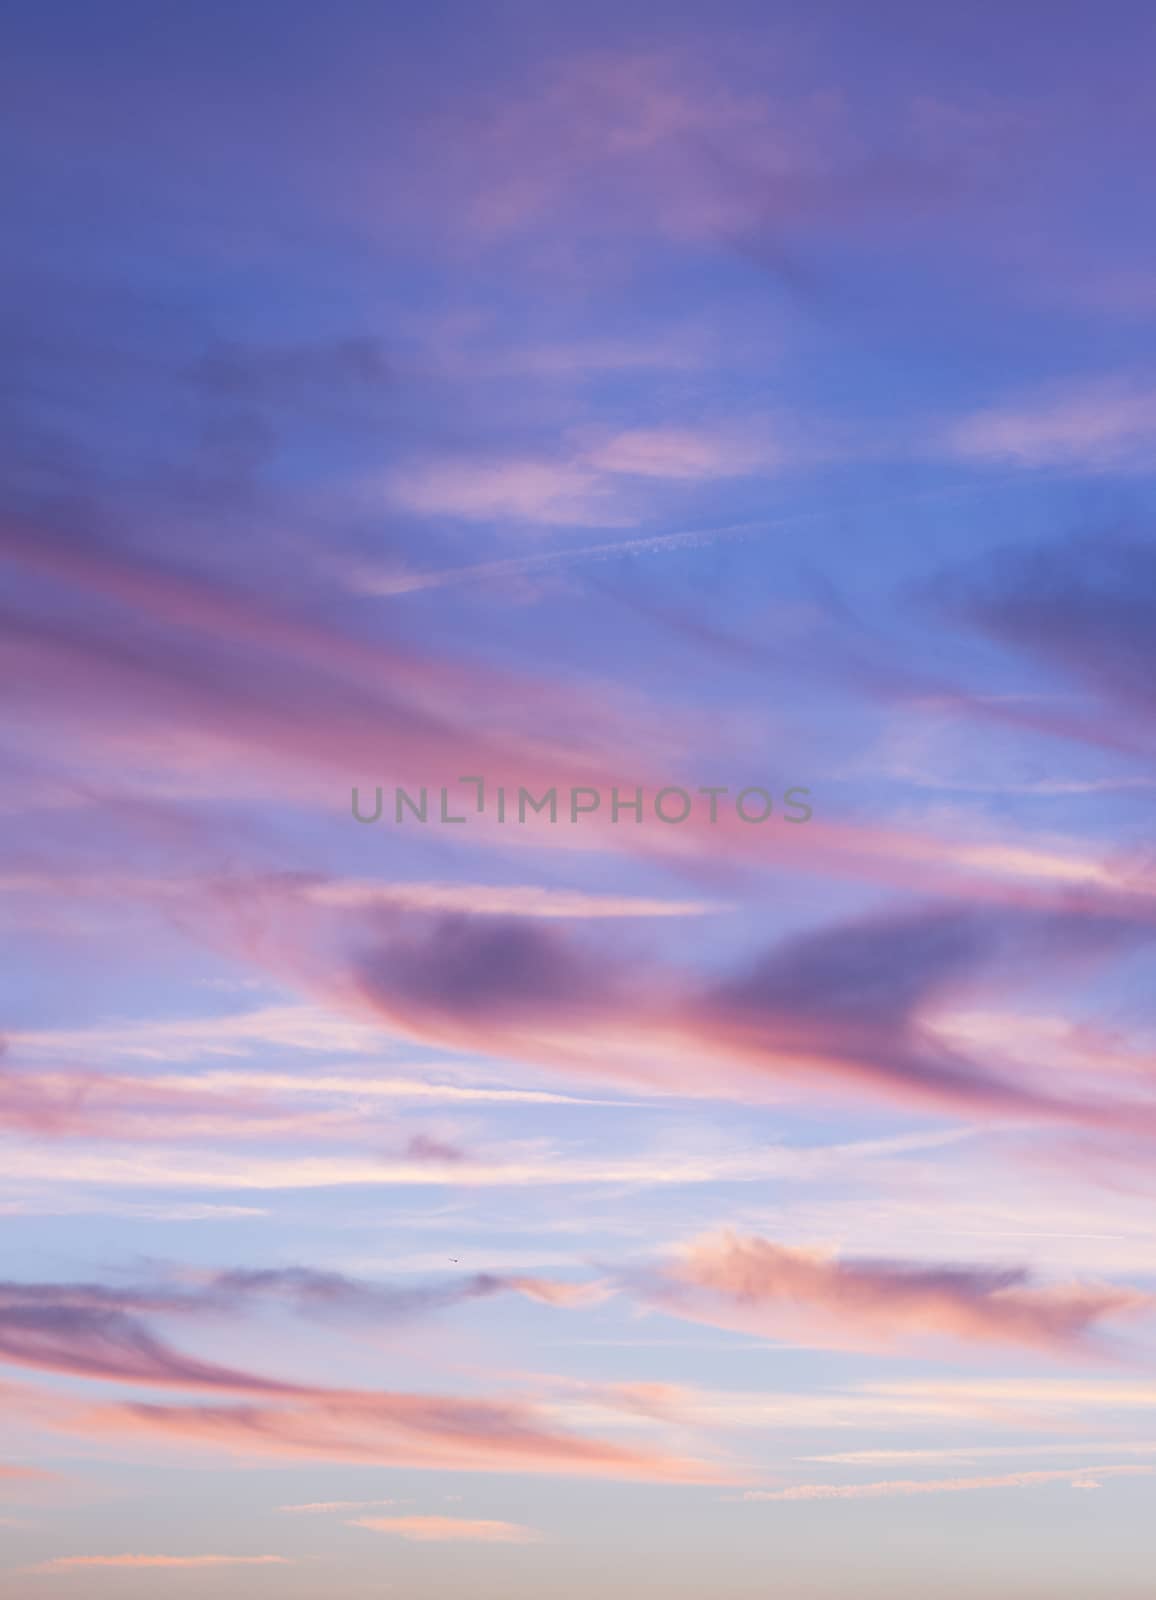 Sky with clouds in blue and pink sunset evening pastel colors vertical rectangular photo. 